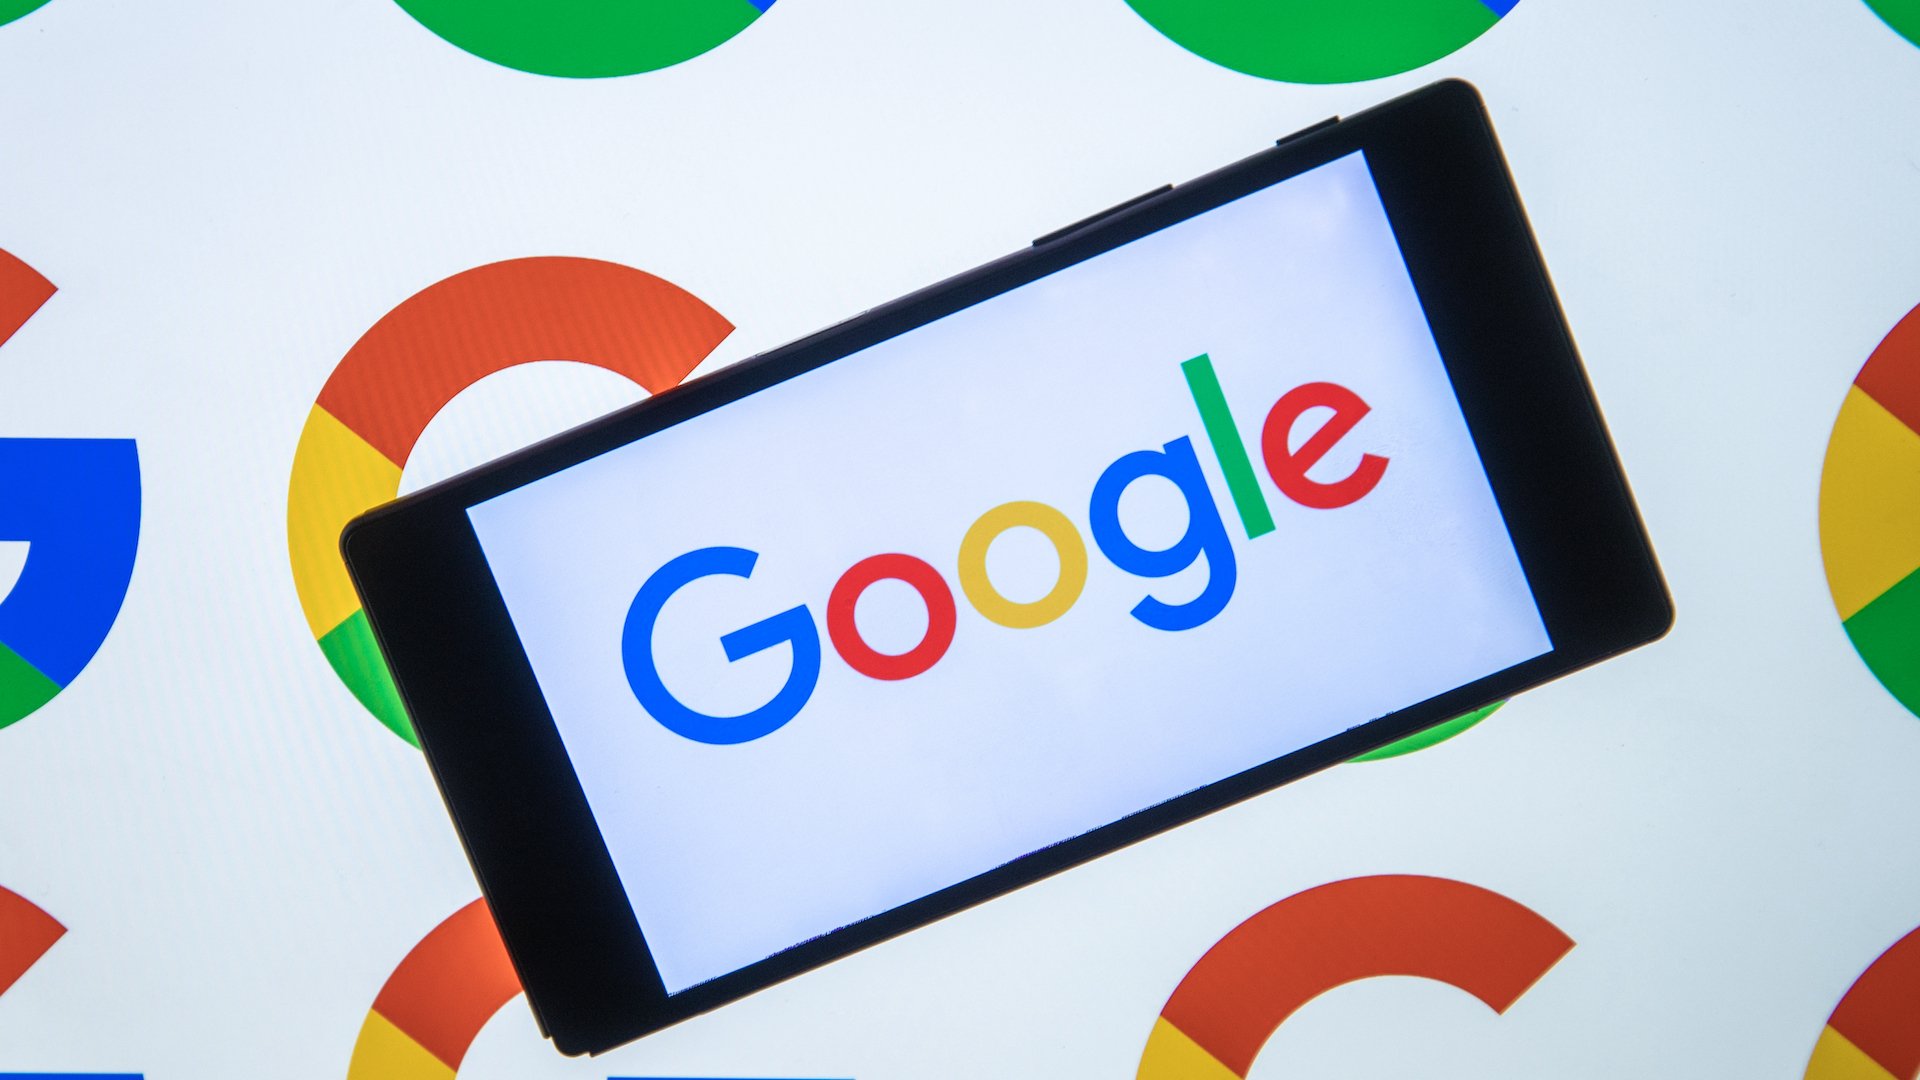  the logo of Google is displayed on the mobile phone screen in front of the logo of Google displaying on the screen